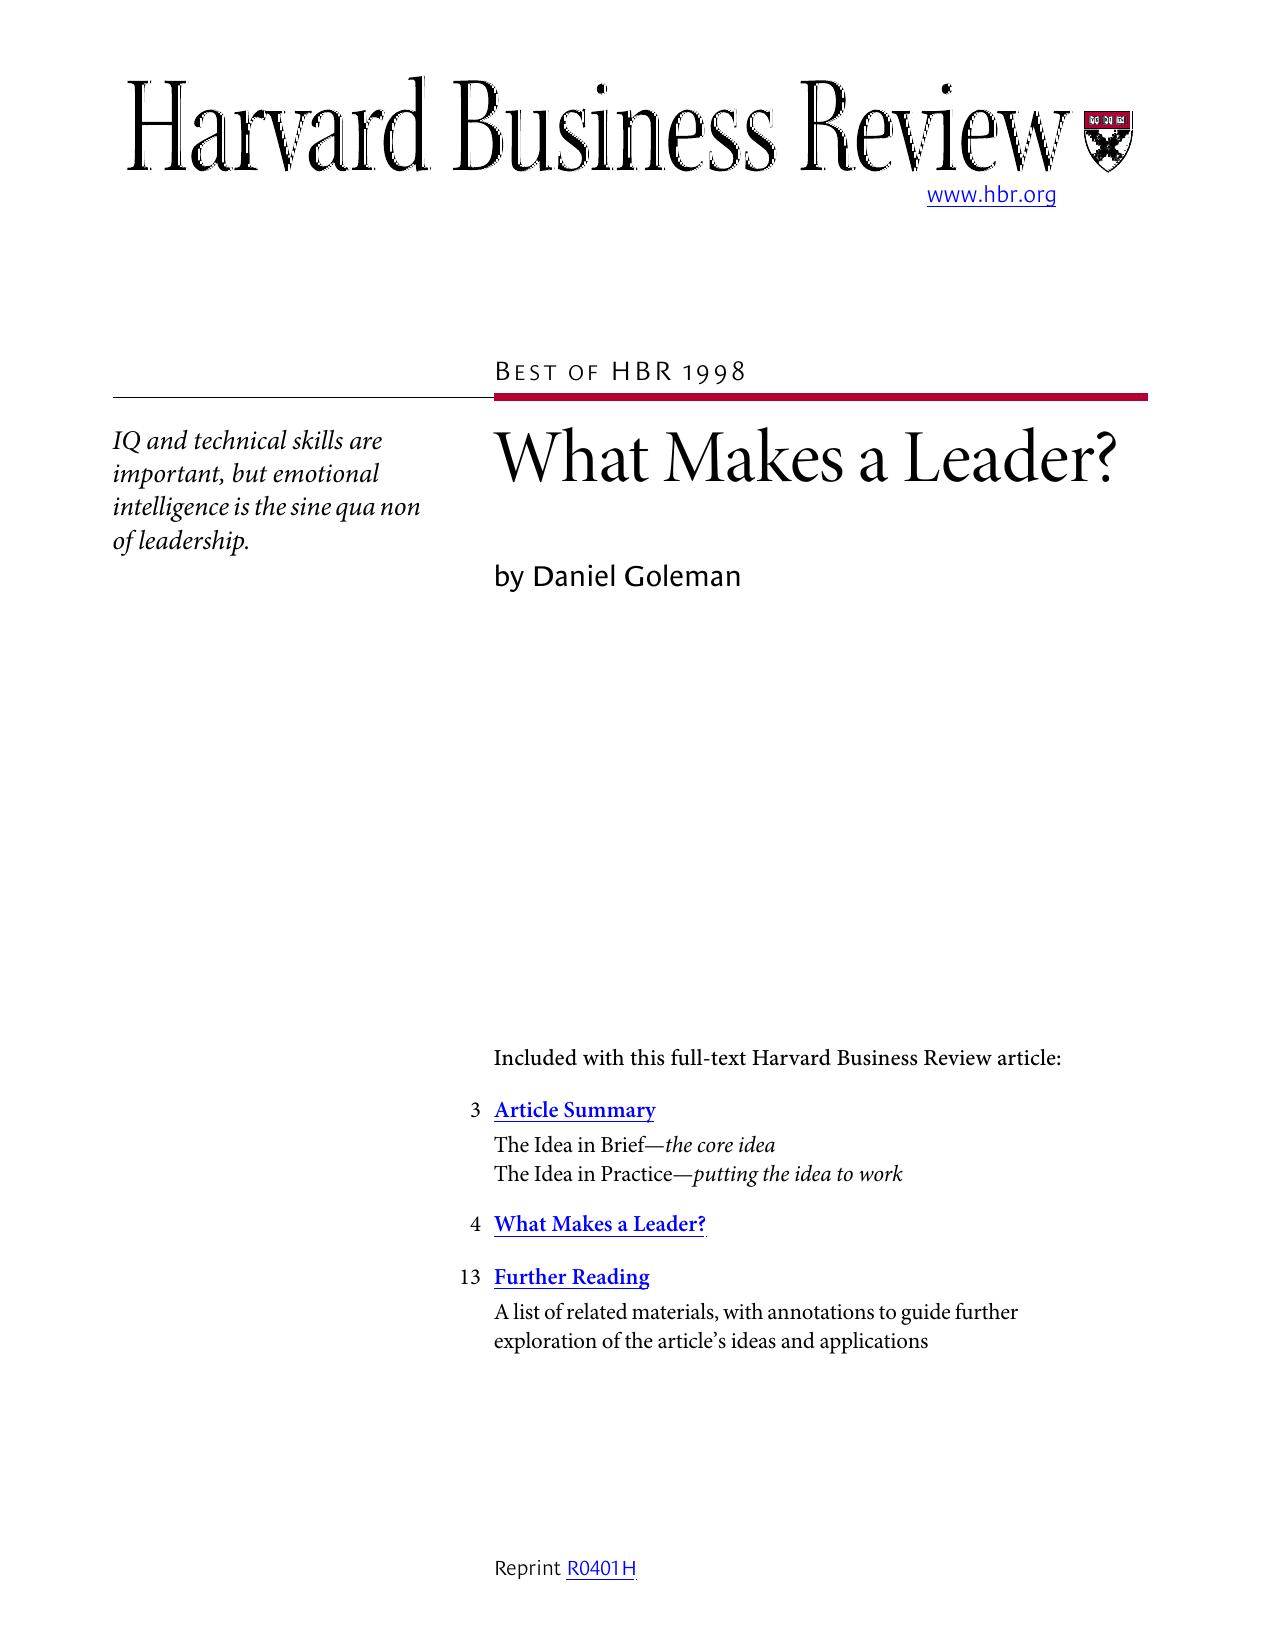 HBR's Must-Reads on Leadership: What Makes a Leader?